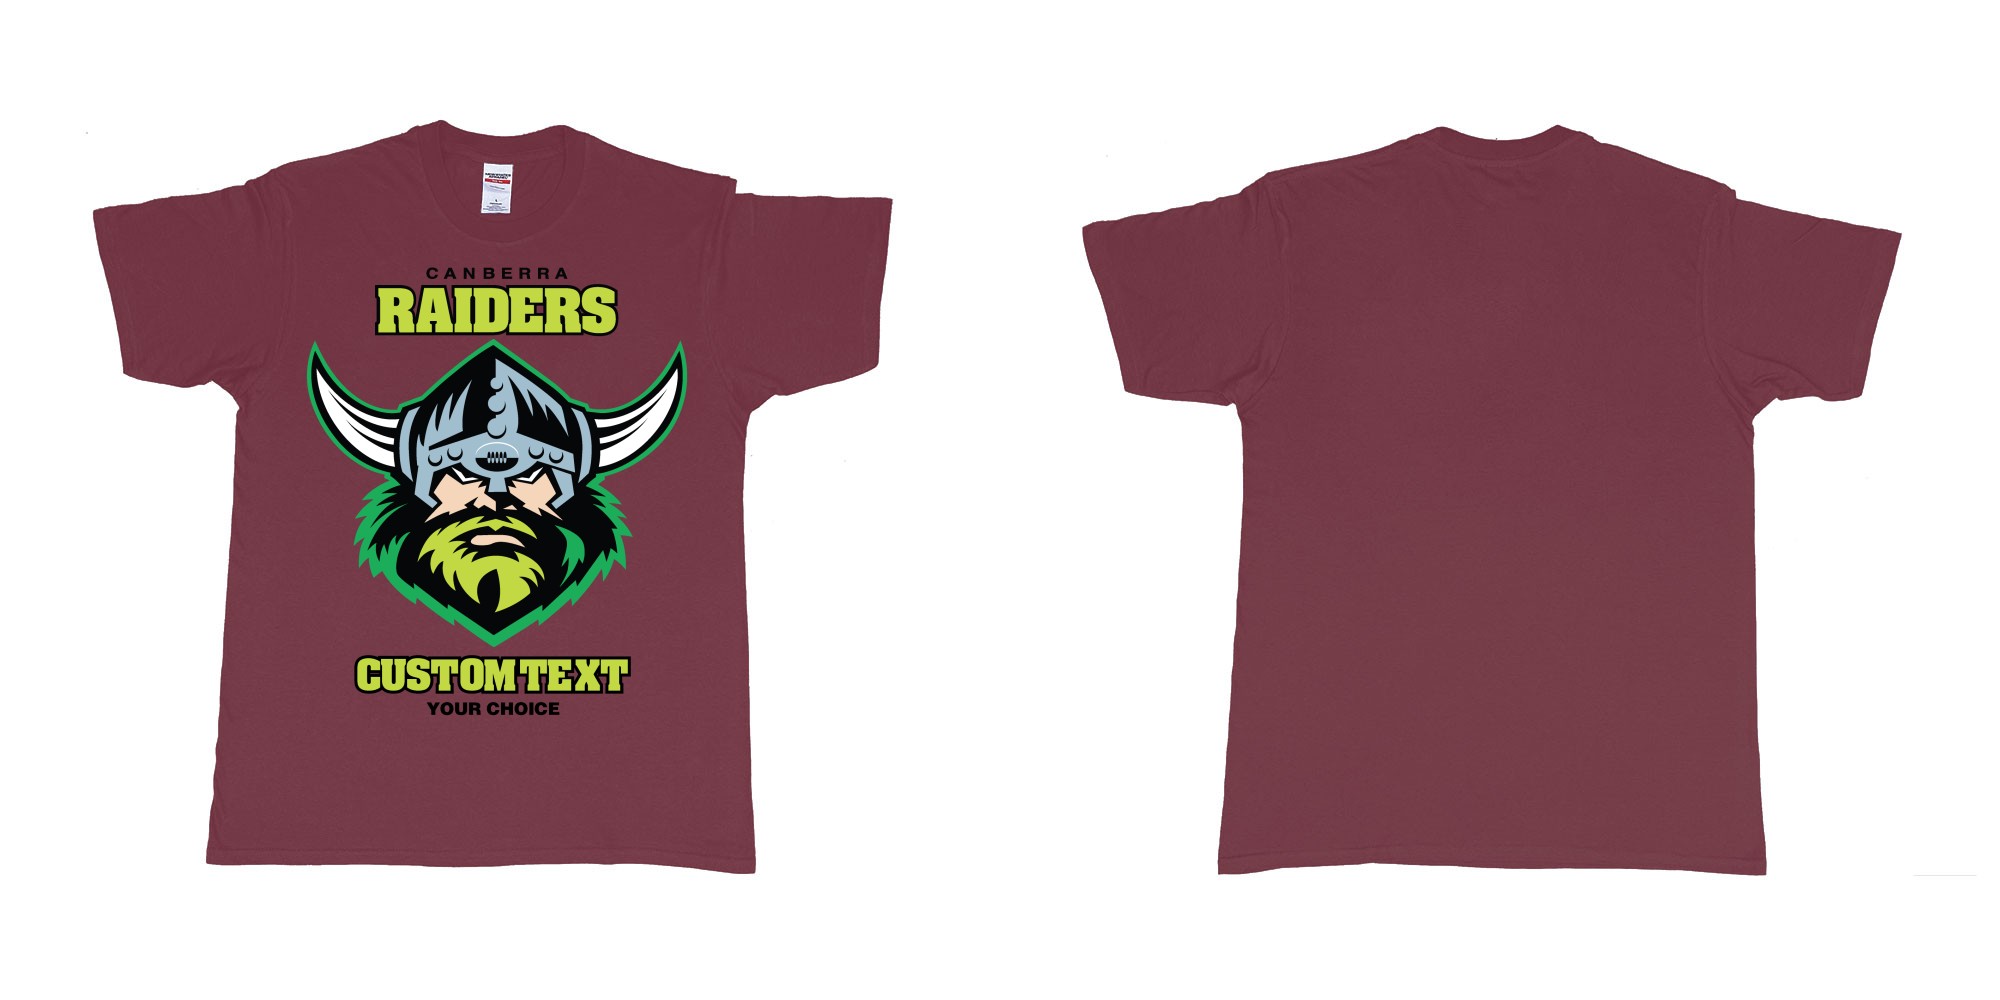 Custom tshirt design canberra raiders nrl logo own printed text near you in fabric color marron choice your own text made in Bali by The Pirate Way